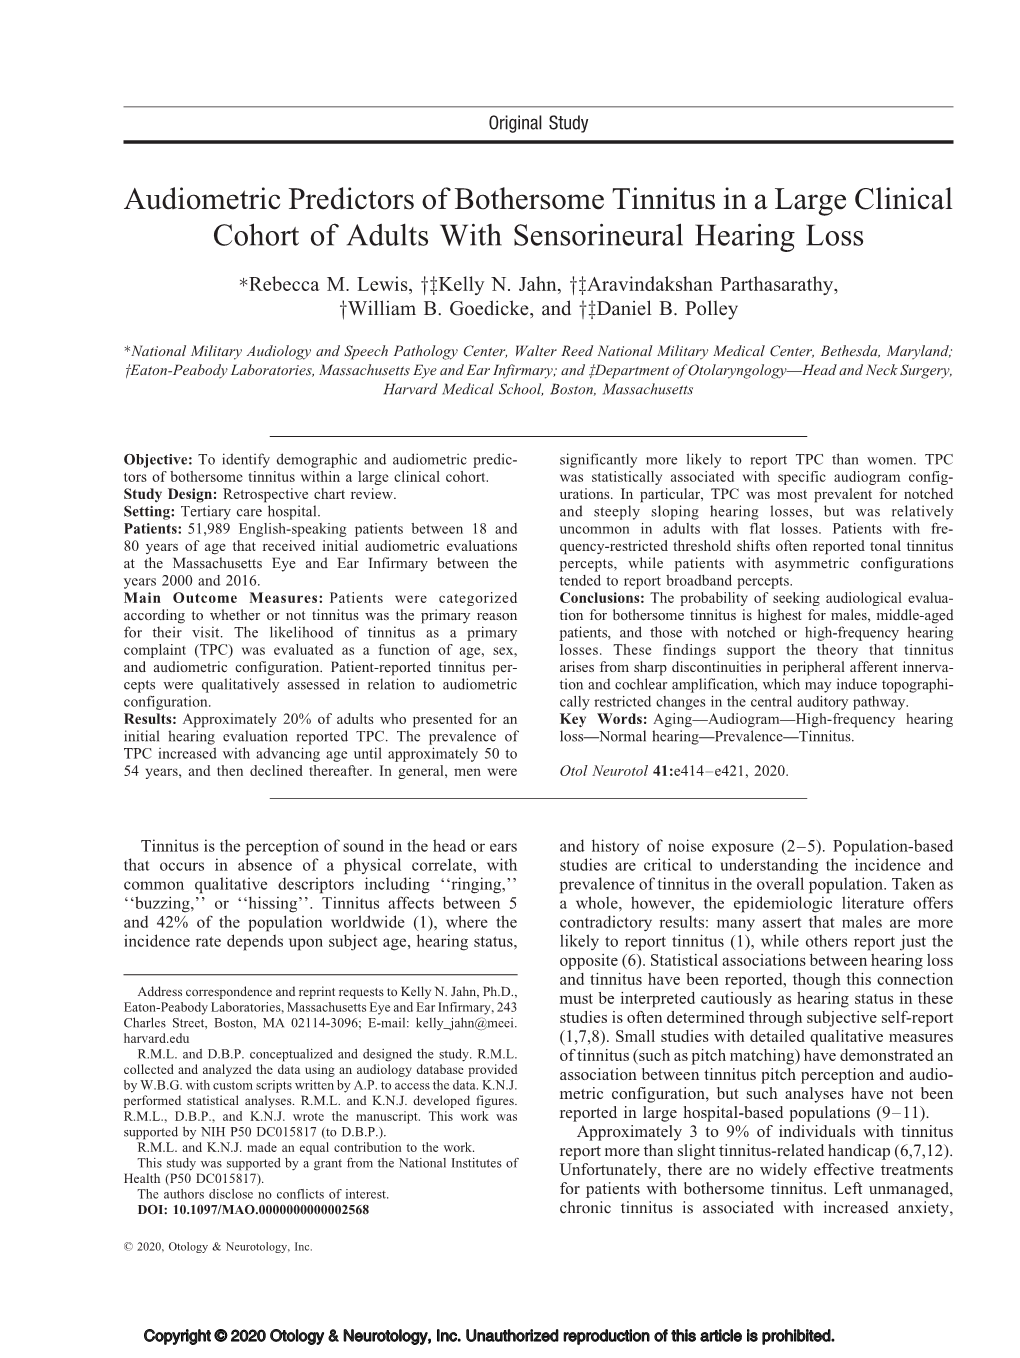 Audiometric Predictors of Bothersome Tinnitus in a Large Clinical Cohort of Adults with Sensorineural Hearing Loss